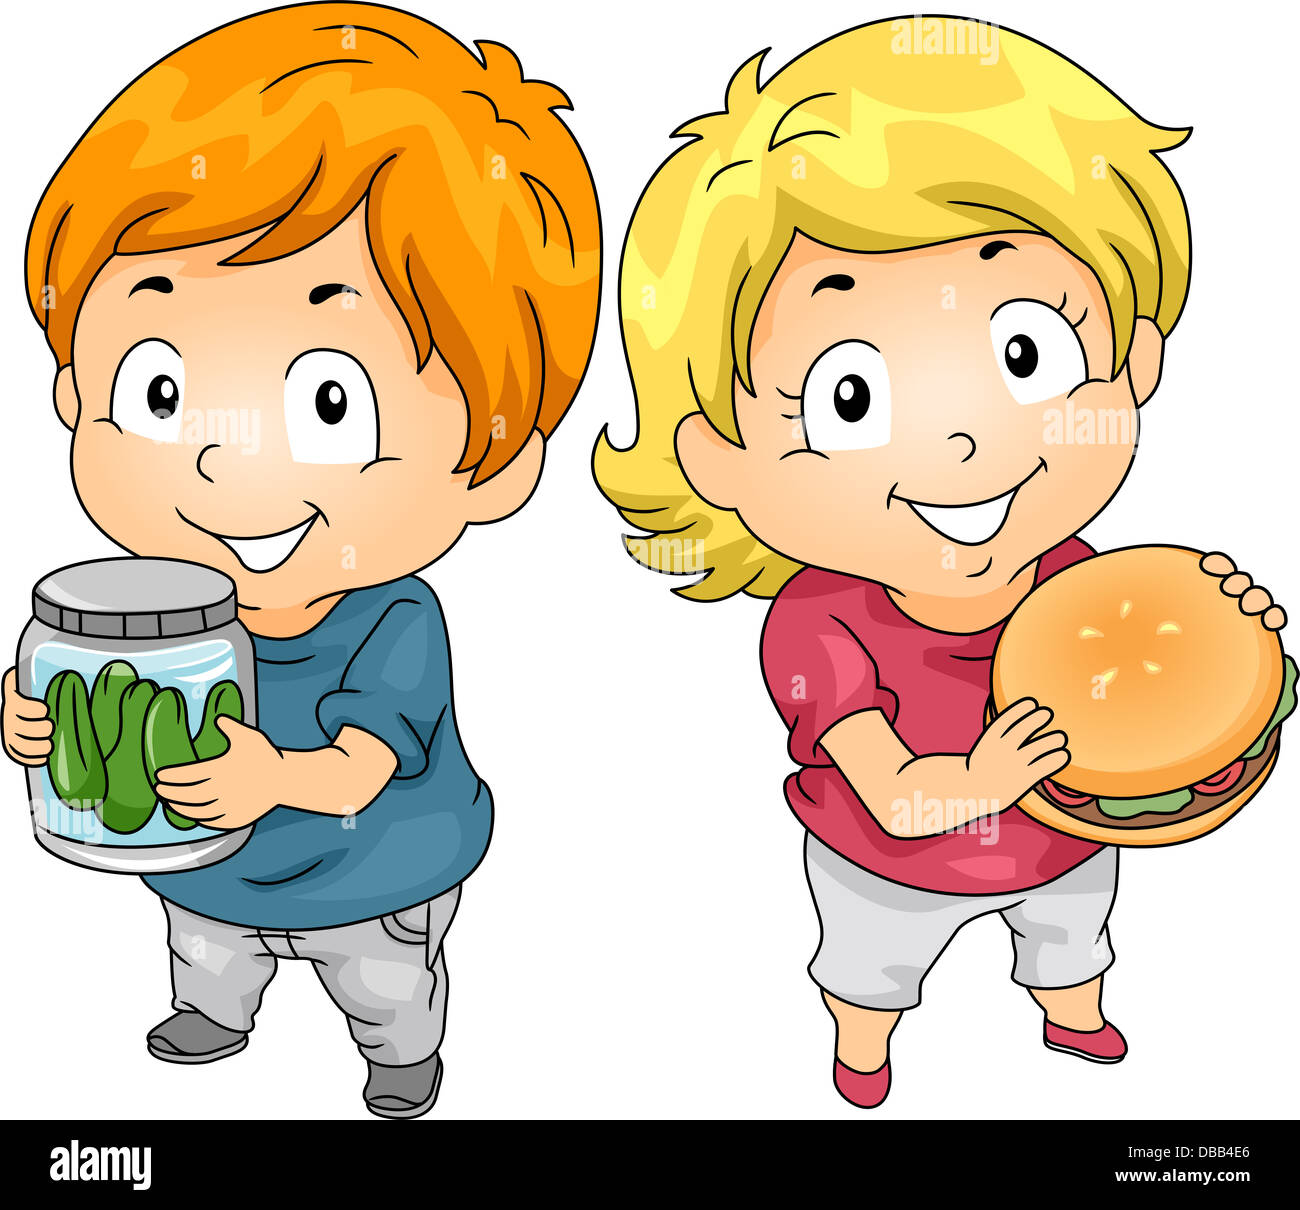 Illustration of Little Male Kid Carrying a Jar of Pickles and a Little Female Kid holding a Hamburger Stock Photo